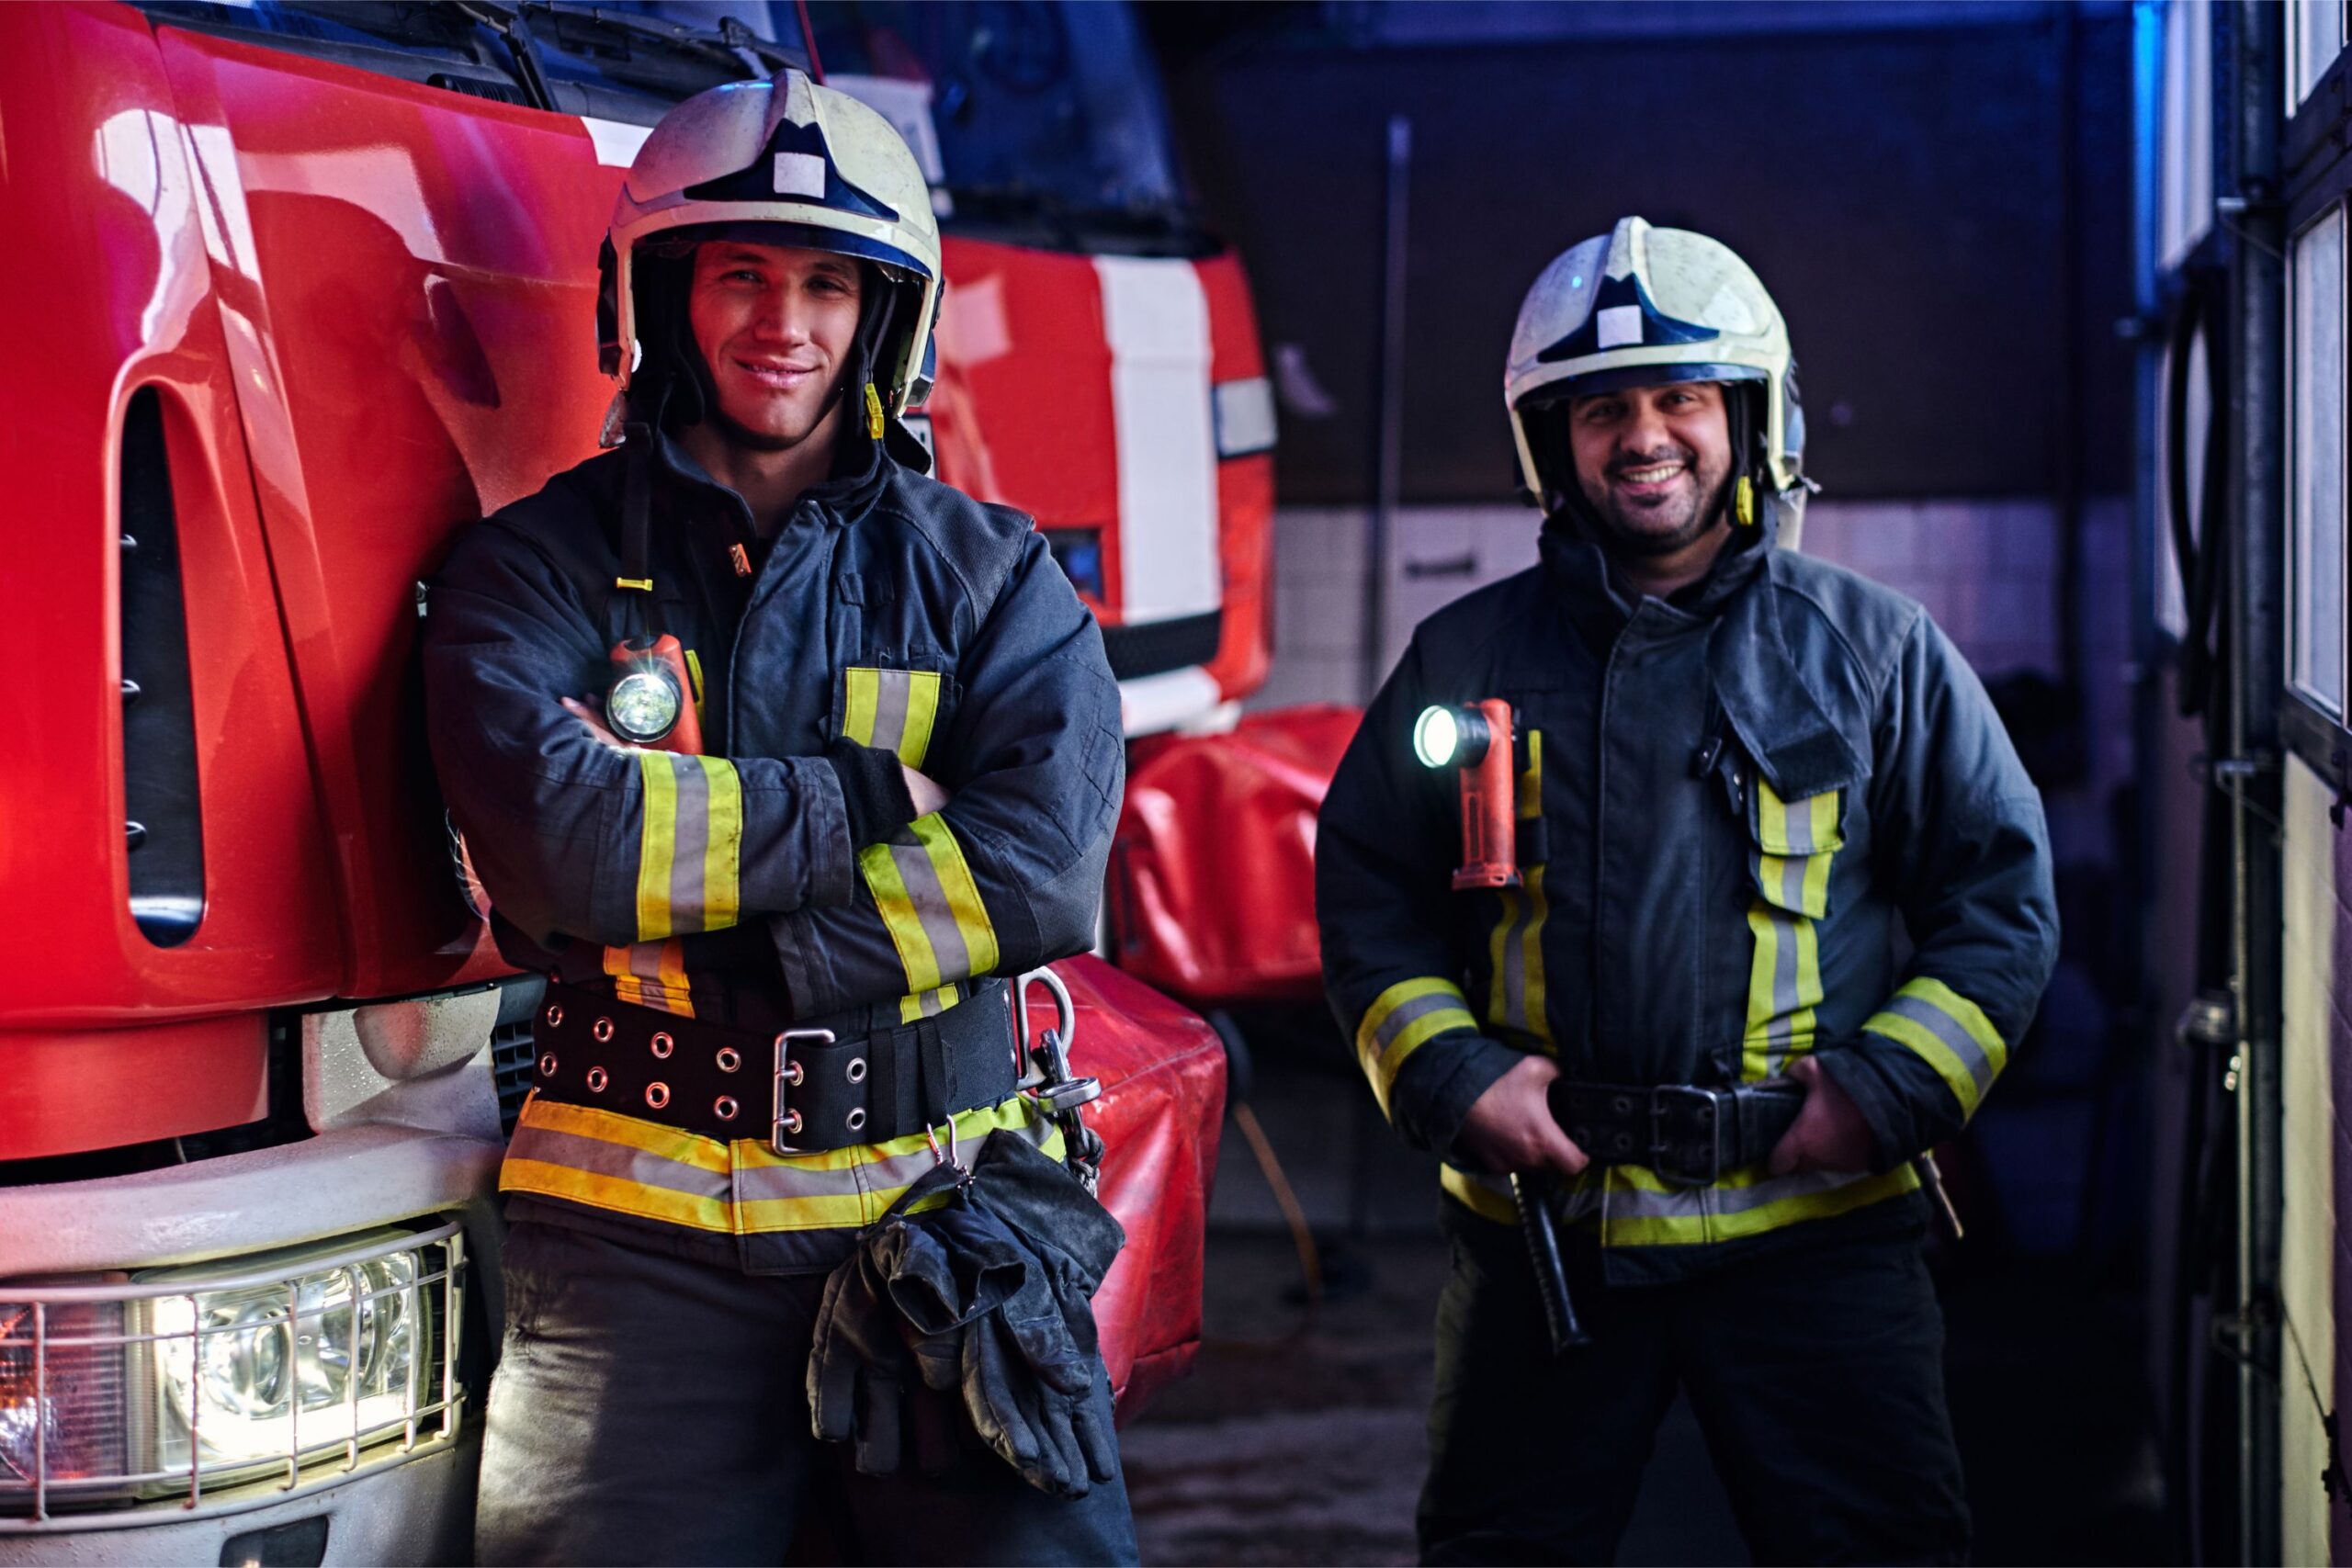 First Responders & Sauna Use: Can Regular Sauna Use Help Mitigate Off-Duty Health Hazards For Firefighters, Law Enforcement Officers, Emergency Room Personnel and Paramedics?